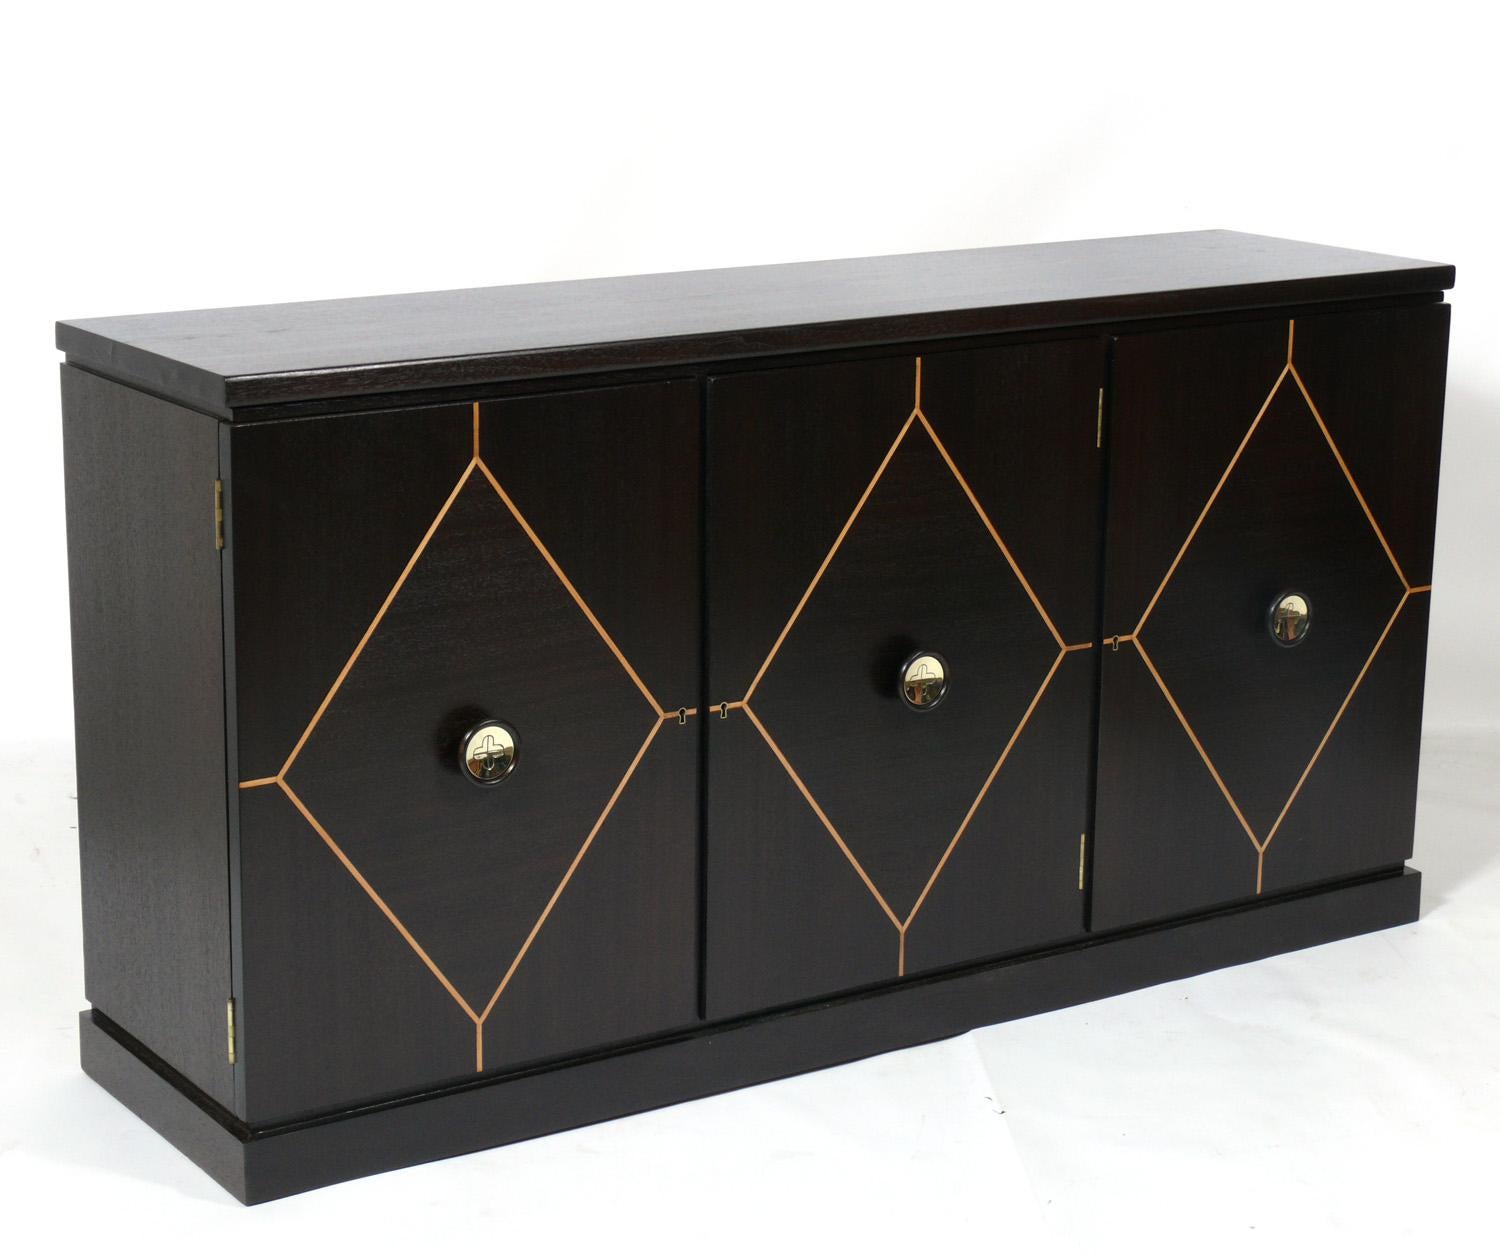 Elegant inlaid credenza, designed by Tommi Parzinger for Charak, American, circa 1950s. It offers a voluminous amount of storage, with the left and right doors opening to reveal large areas with adjustable shelving, and the center door opening to